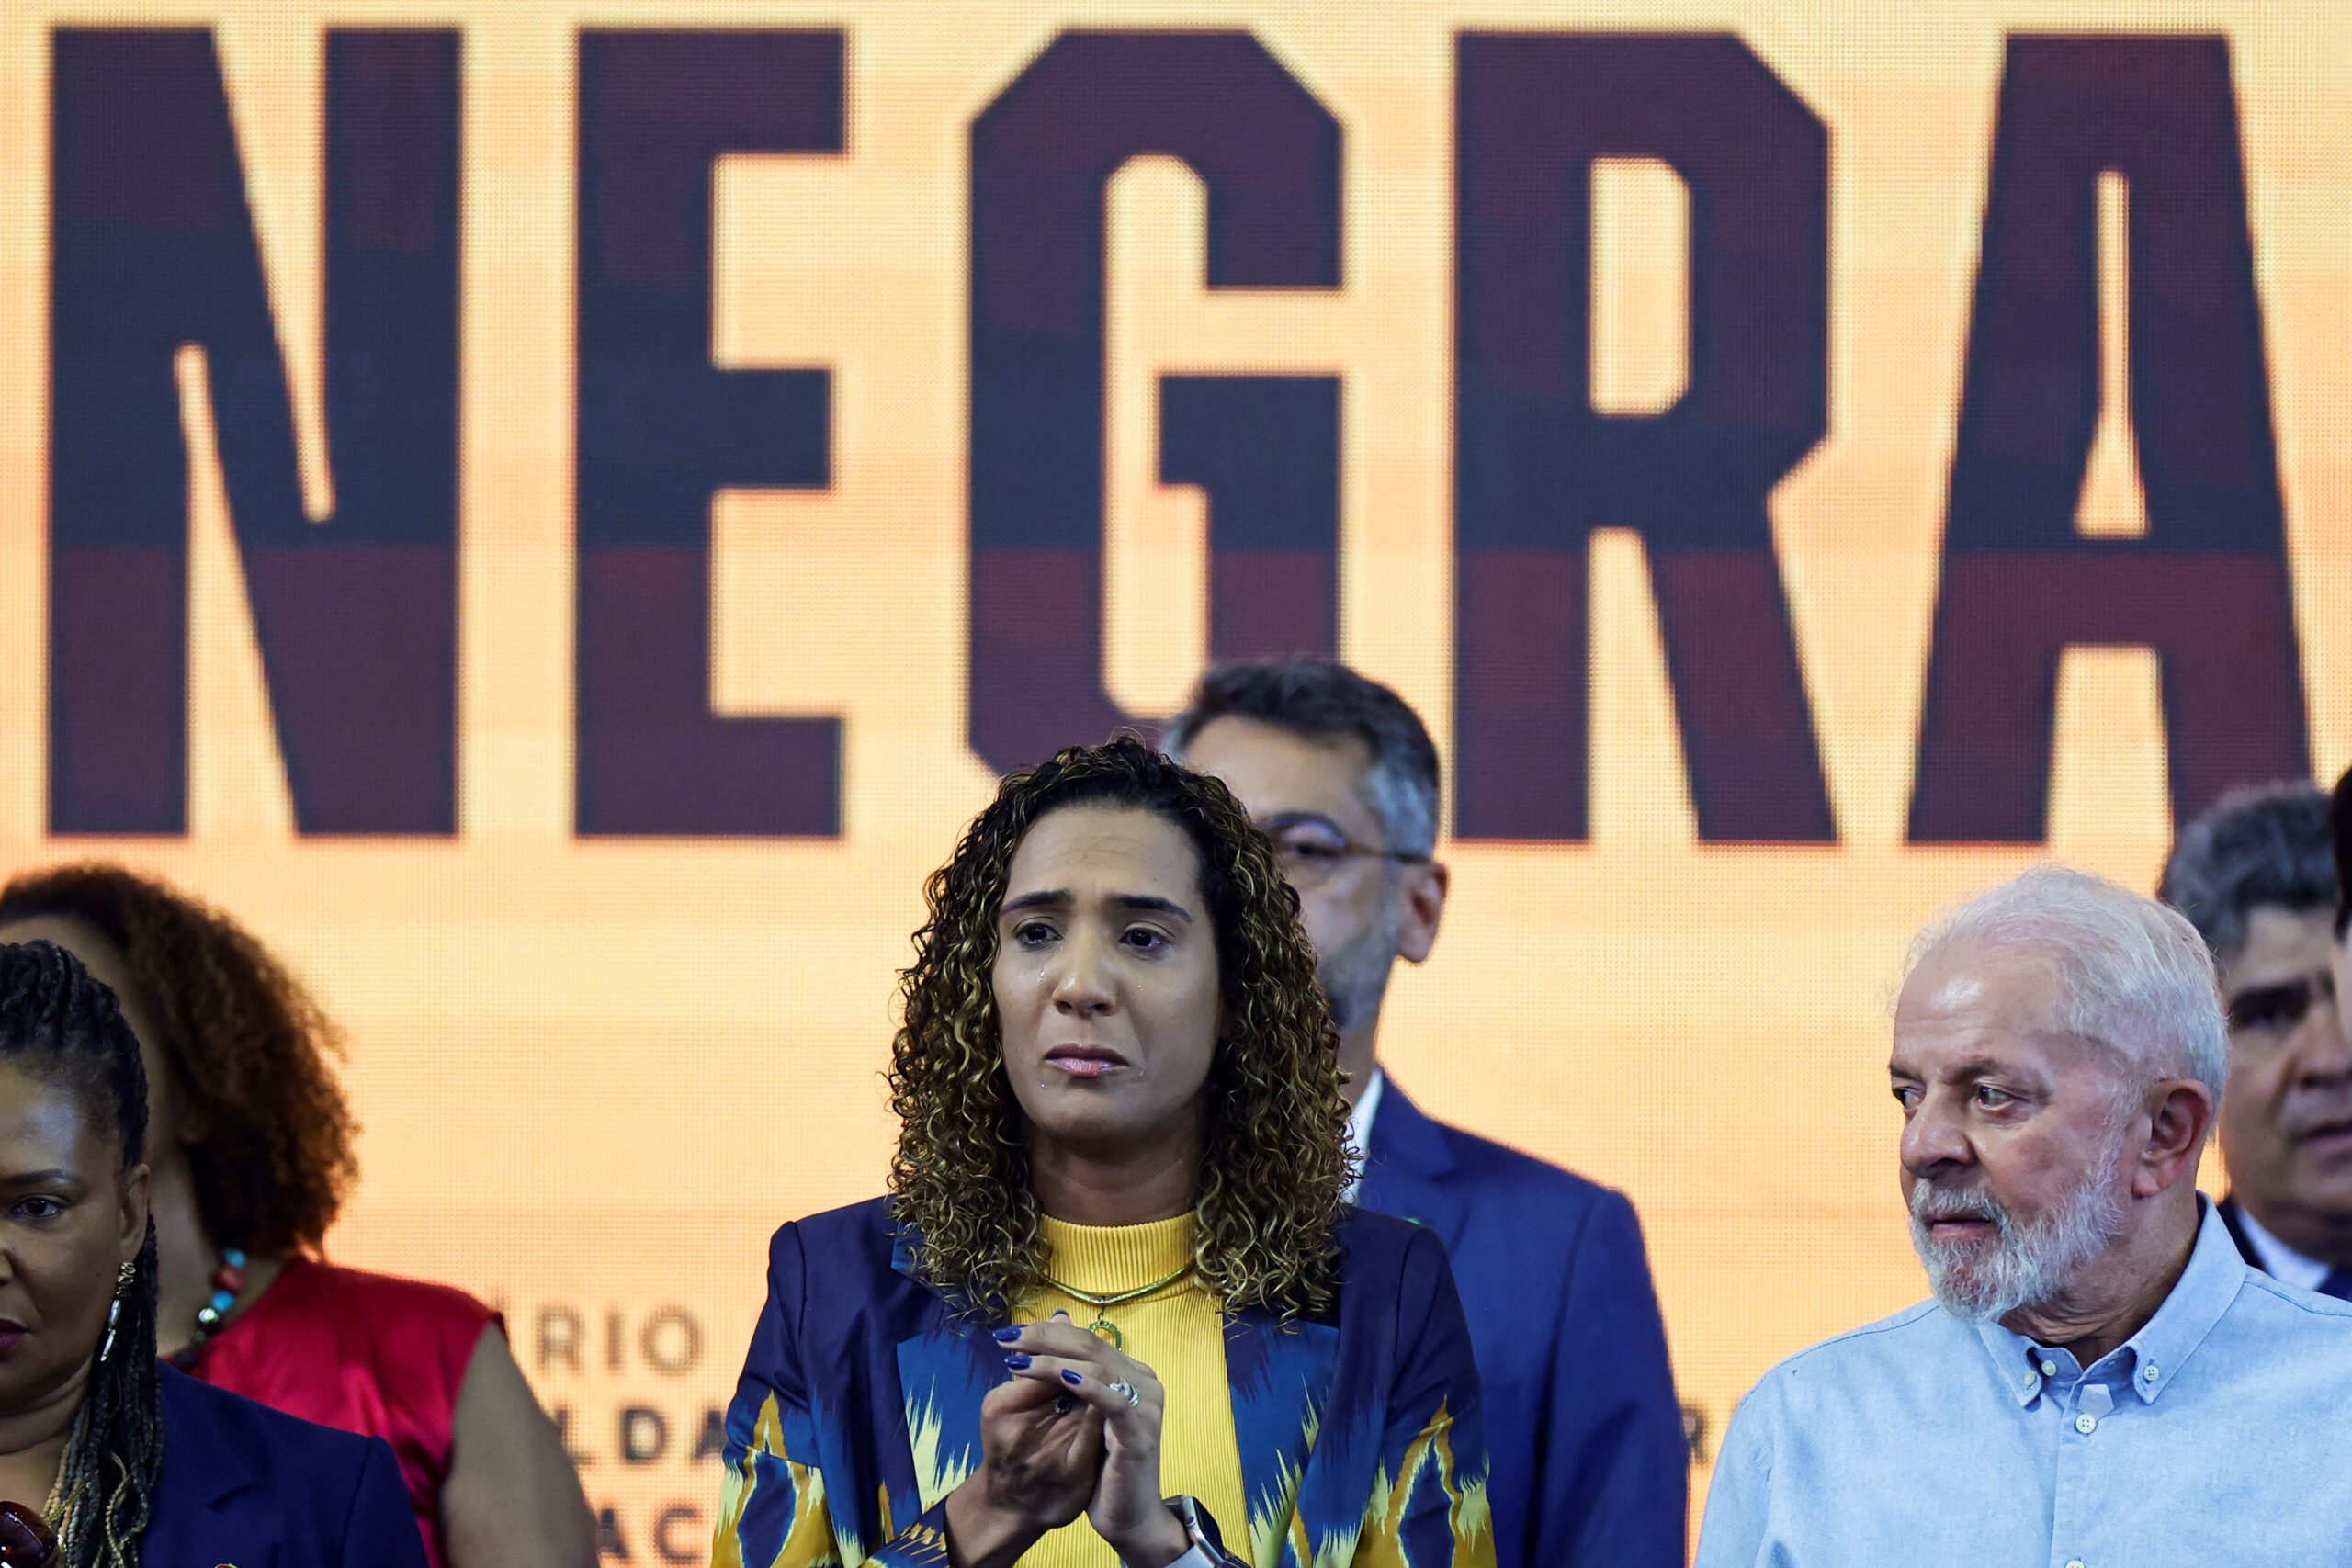 Brazil police arrest lawmaker, 2 others for Marielle Franco murder - Buenos Aires Herald